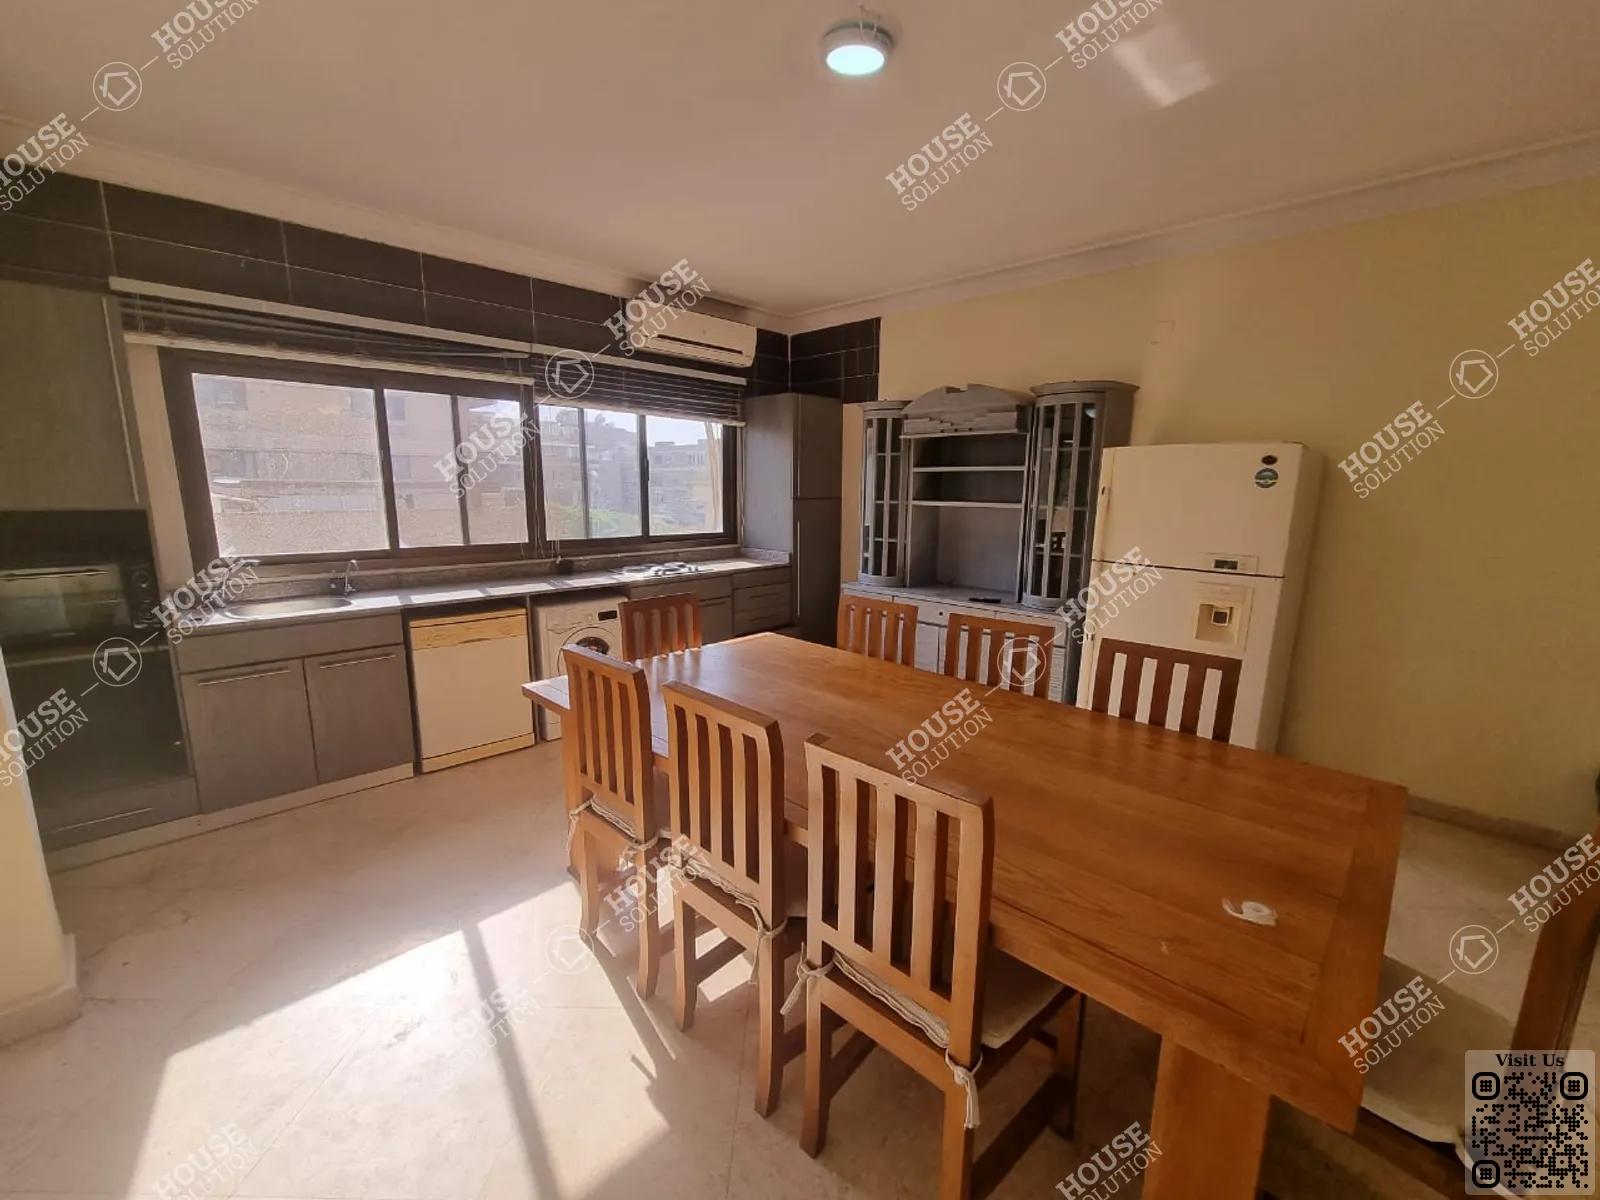 KITCHEN  @ Apartments For Rent In Maadi Maadi Degla Area: 160 m² consists of 2 Bedrooms 2 Bathrooms Furnished 5 stars #5443-1